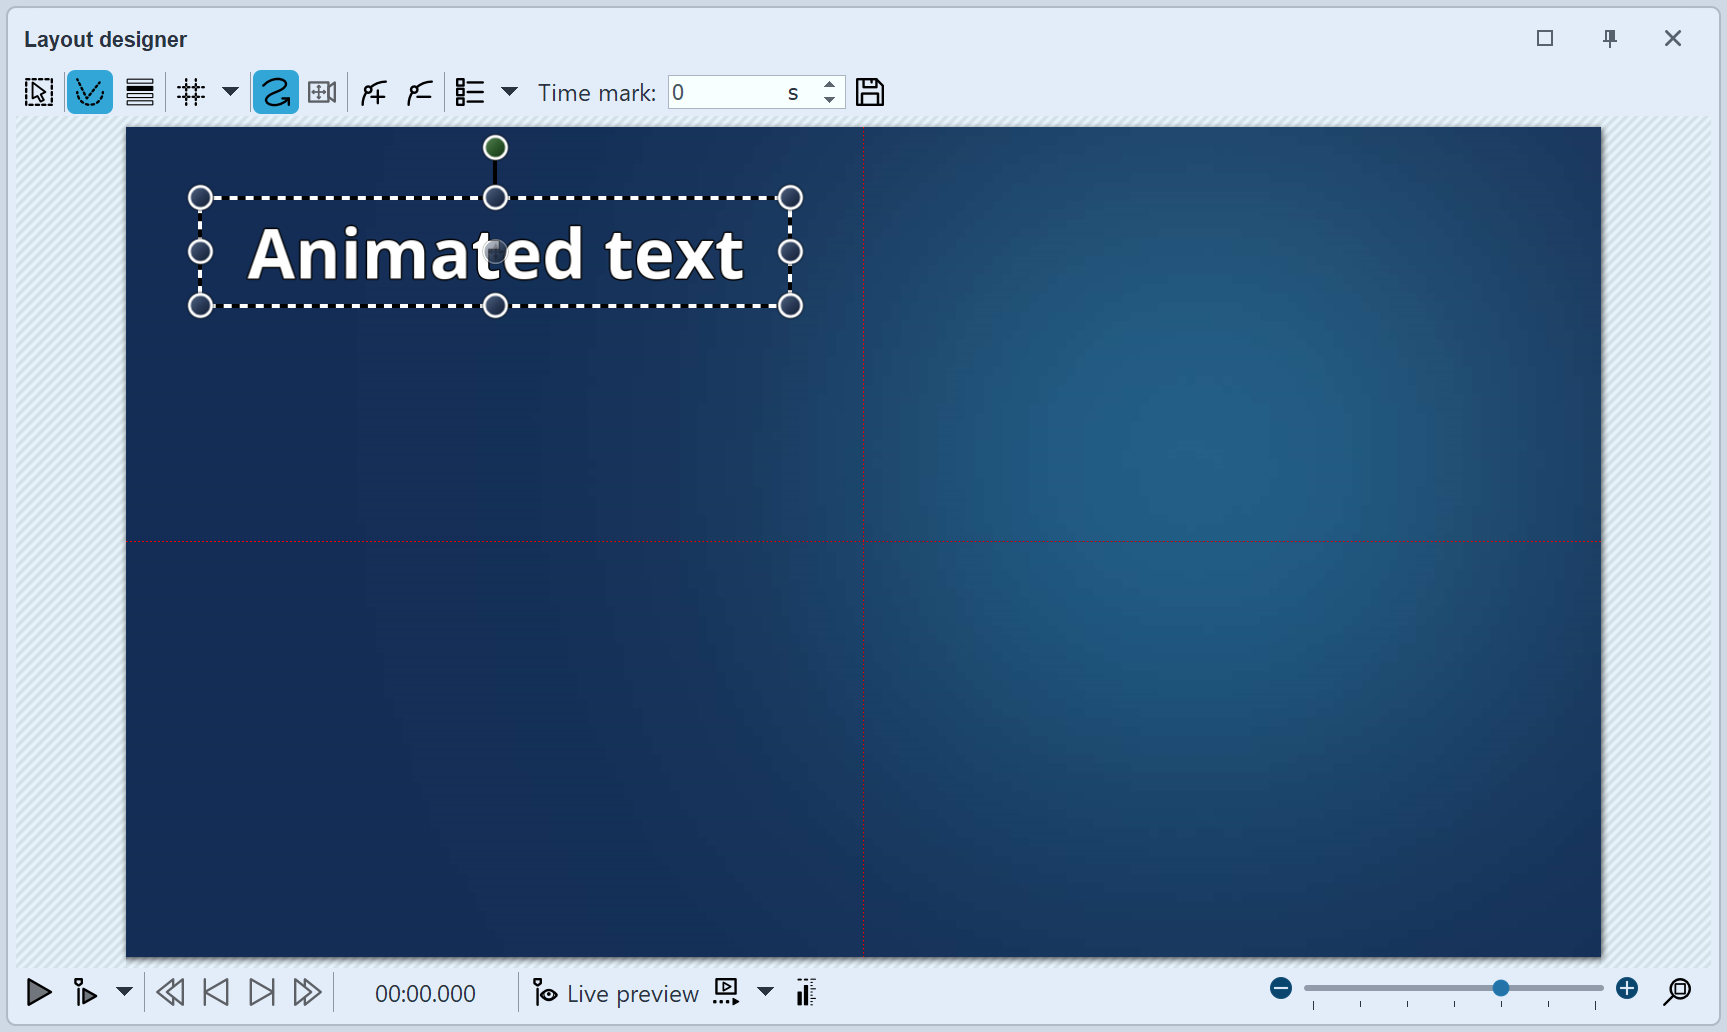 Position the text in the Layout designer